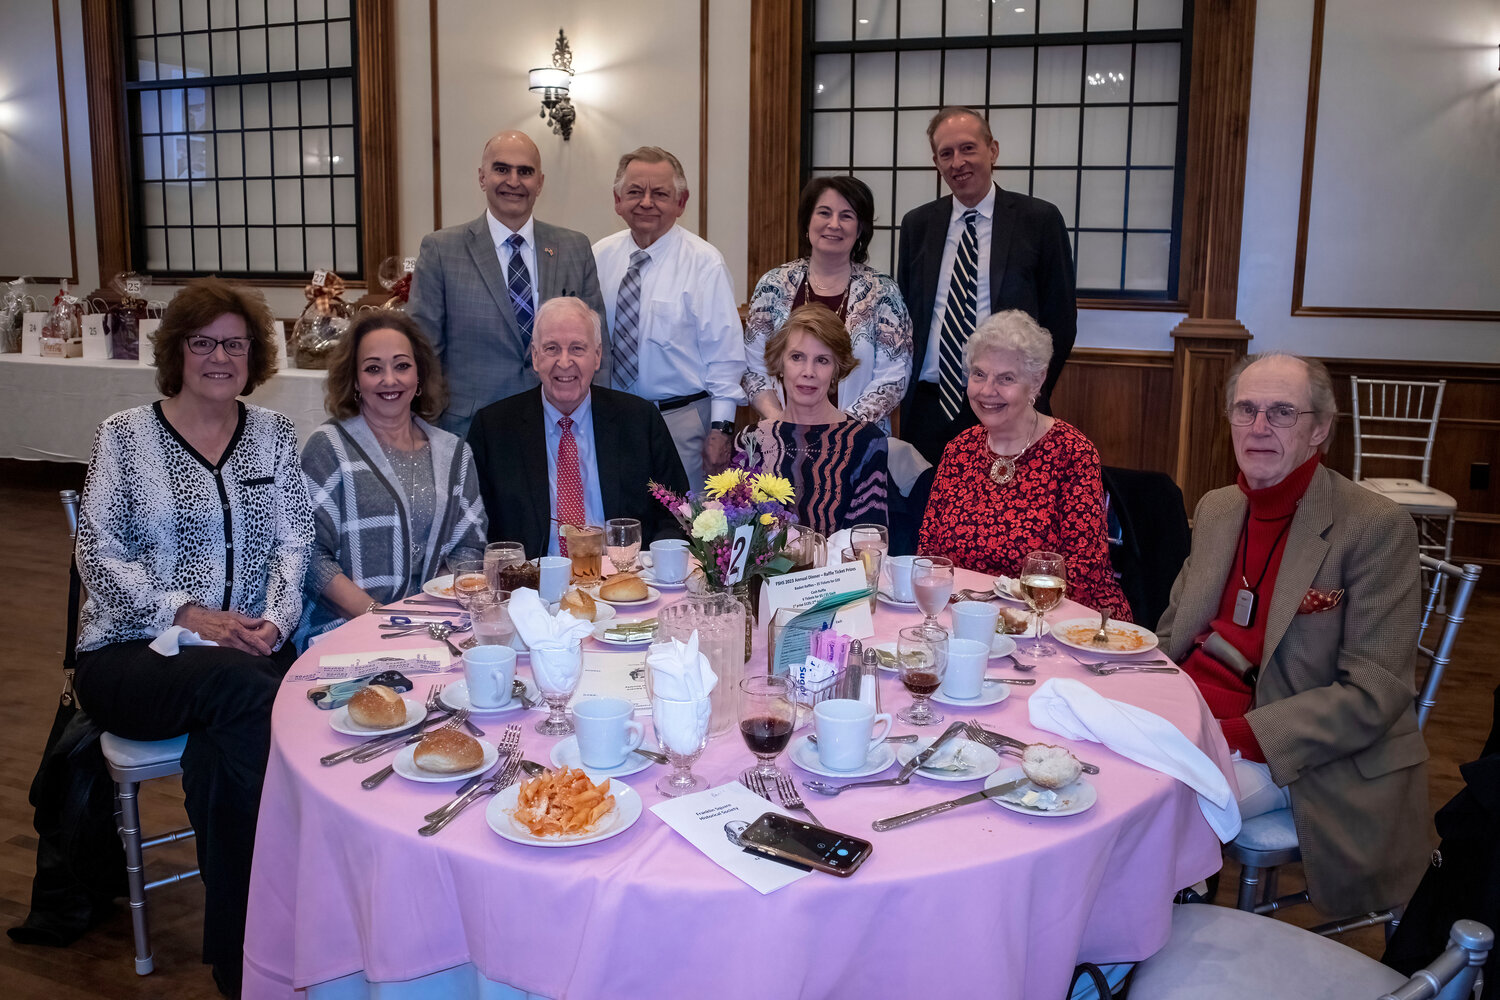 Janet Adams, sitting left, Jackie Vita, Kemp Hannon, Bronwen Hannon, Franklin Square Museum director Patricia Galaskas, Frank Perunko, Nassau County Legislator John Giuffre,  standing left, Franklin Square Historical Society secretary William Youngfert, Ellen M. van Wie and Dr. Paul van Wie celebrated the honorees and the community’s history at the annual dinner on April 26.